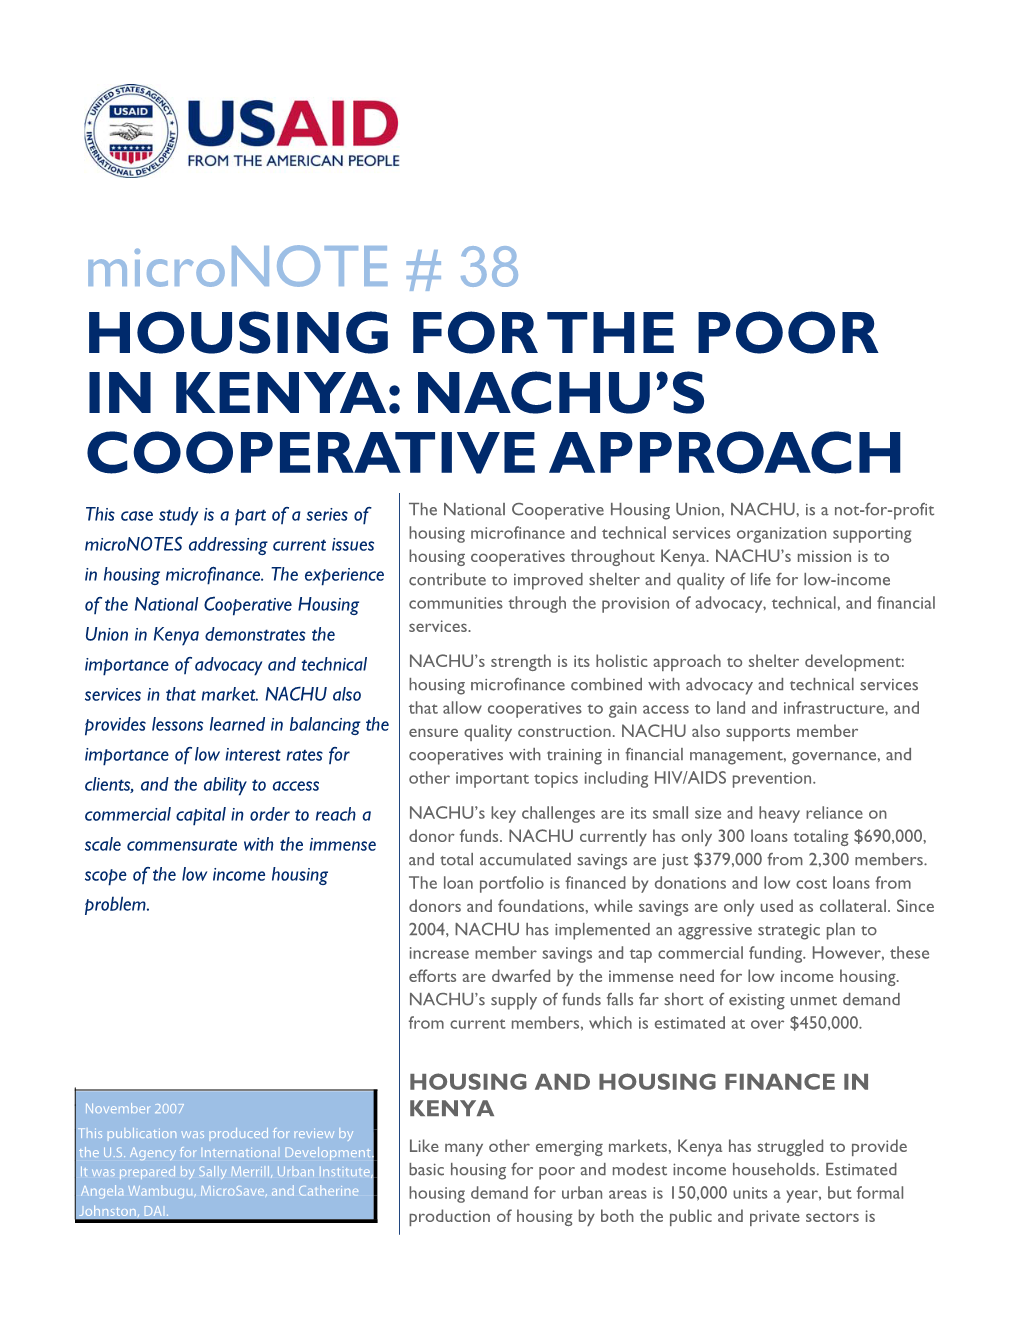 Housing for the Poor in Kenya: NACHU's Cooperative Approach